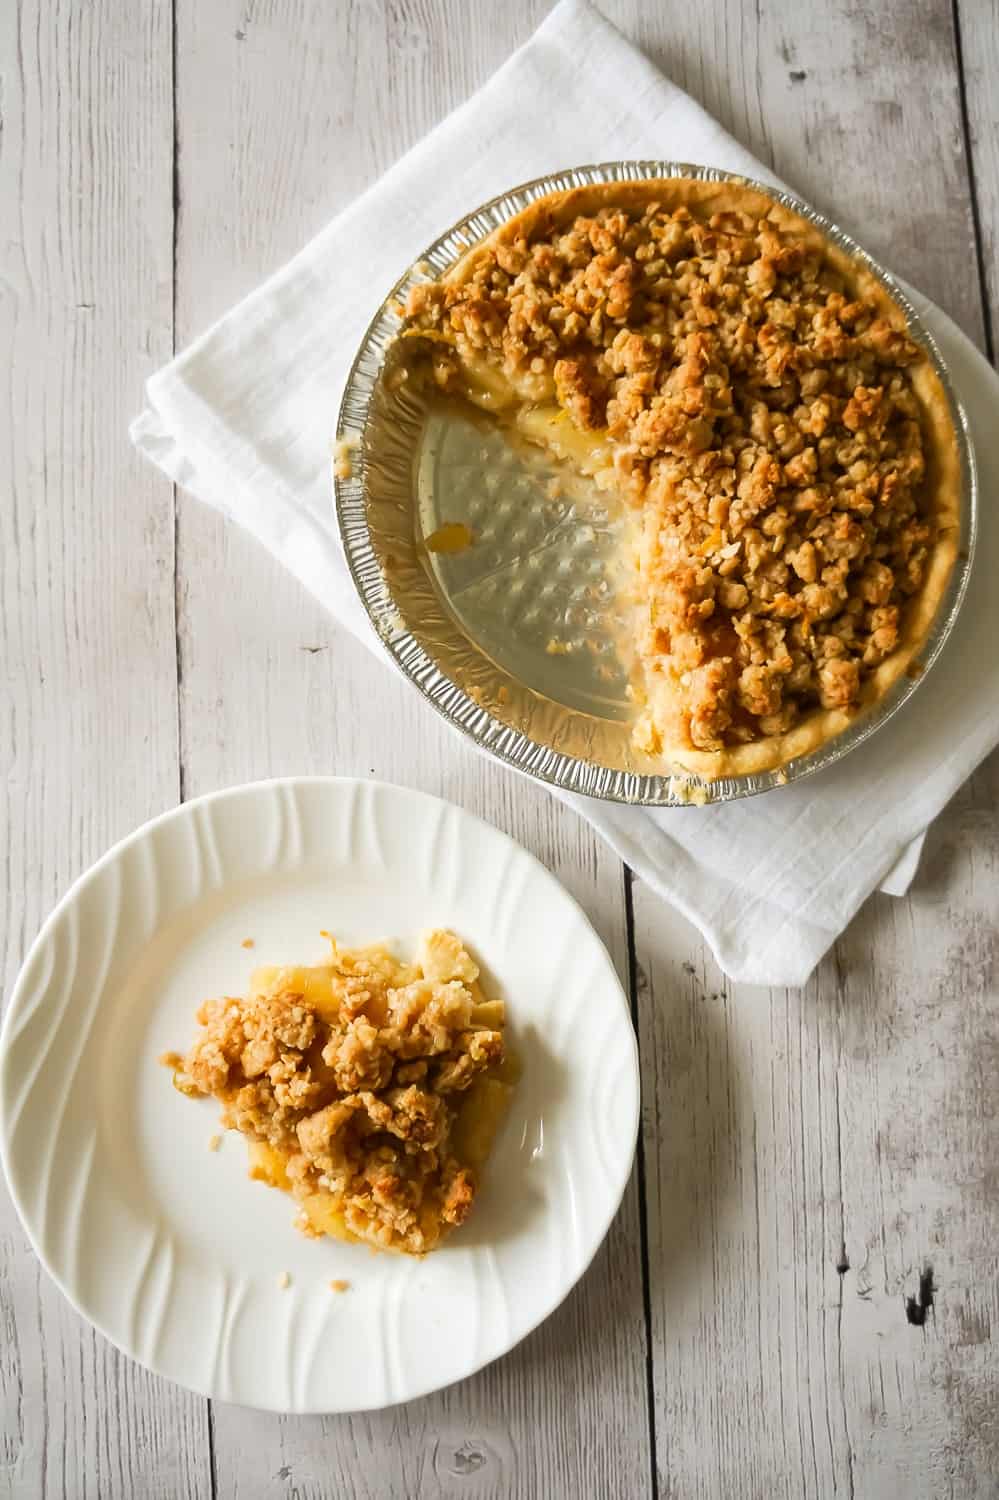 Apple Pie with Crumble Topping is an easy apple pie recipe using store bought crust and pie filling topped with a homemade crumble topping with hints of cinnamon and citrus.